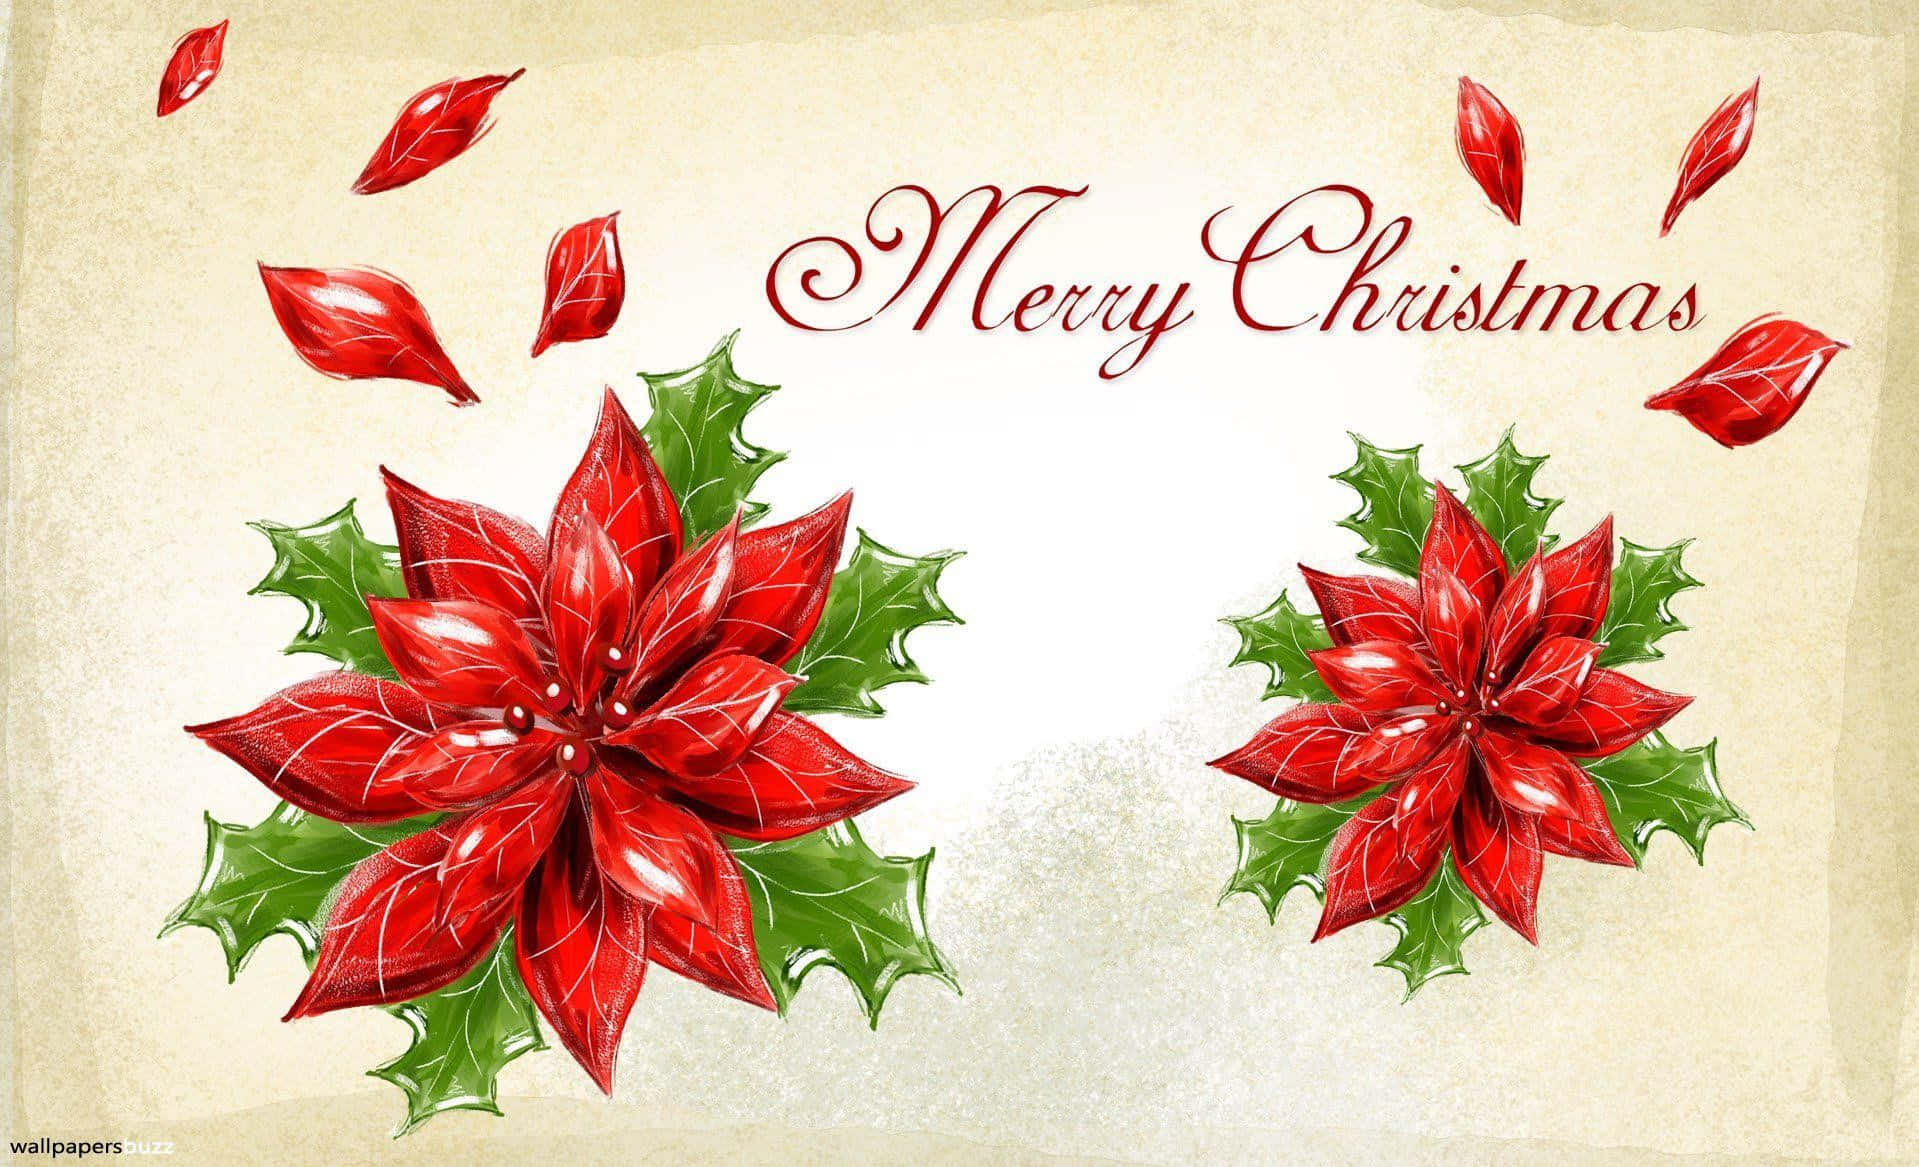 Send Merry Christmas greetings to your loved ones with a beautiful card